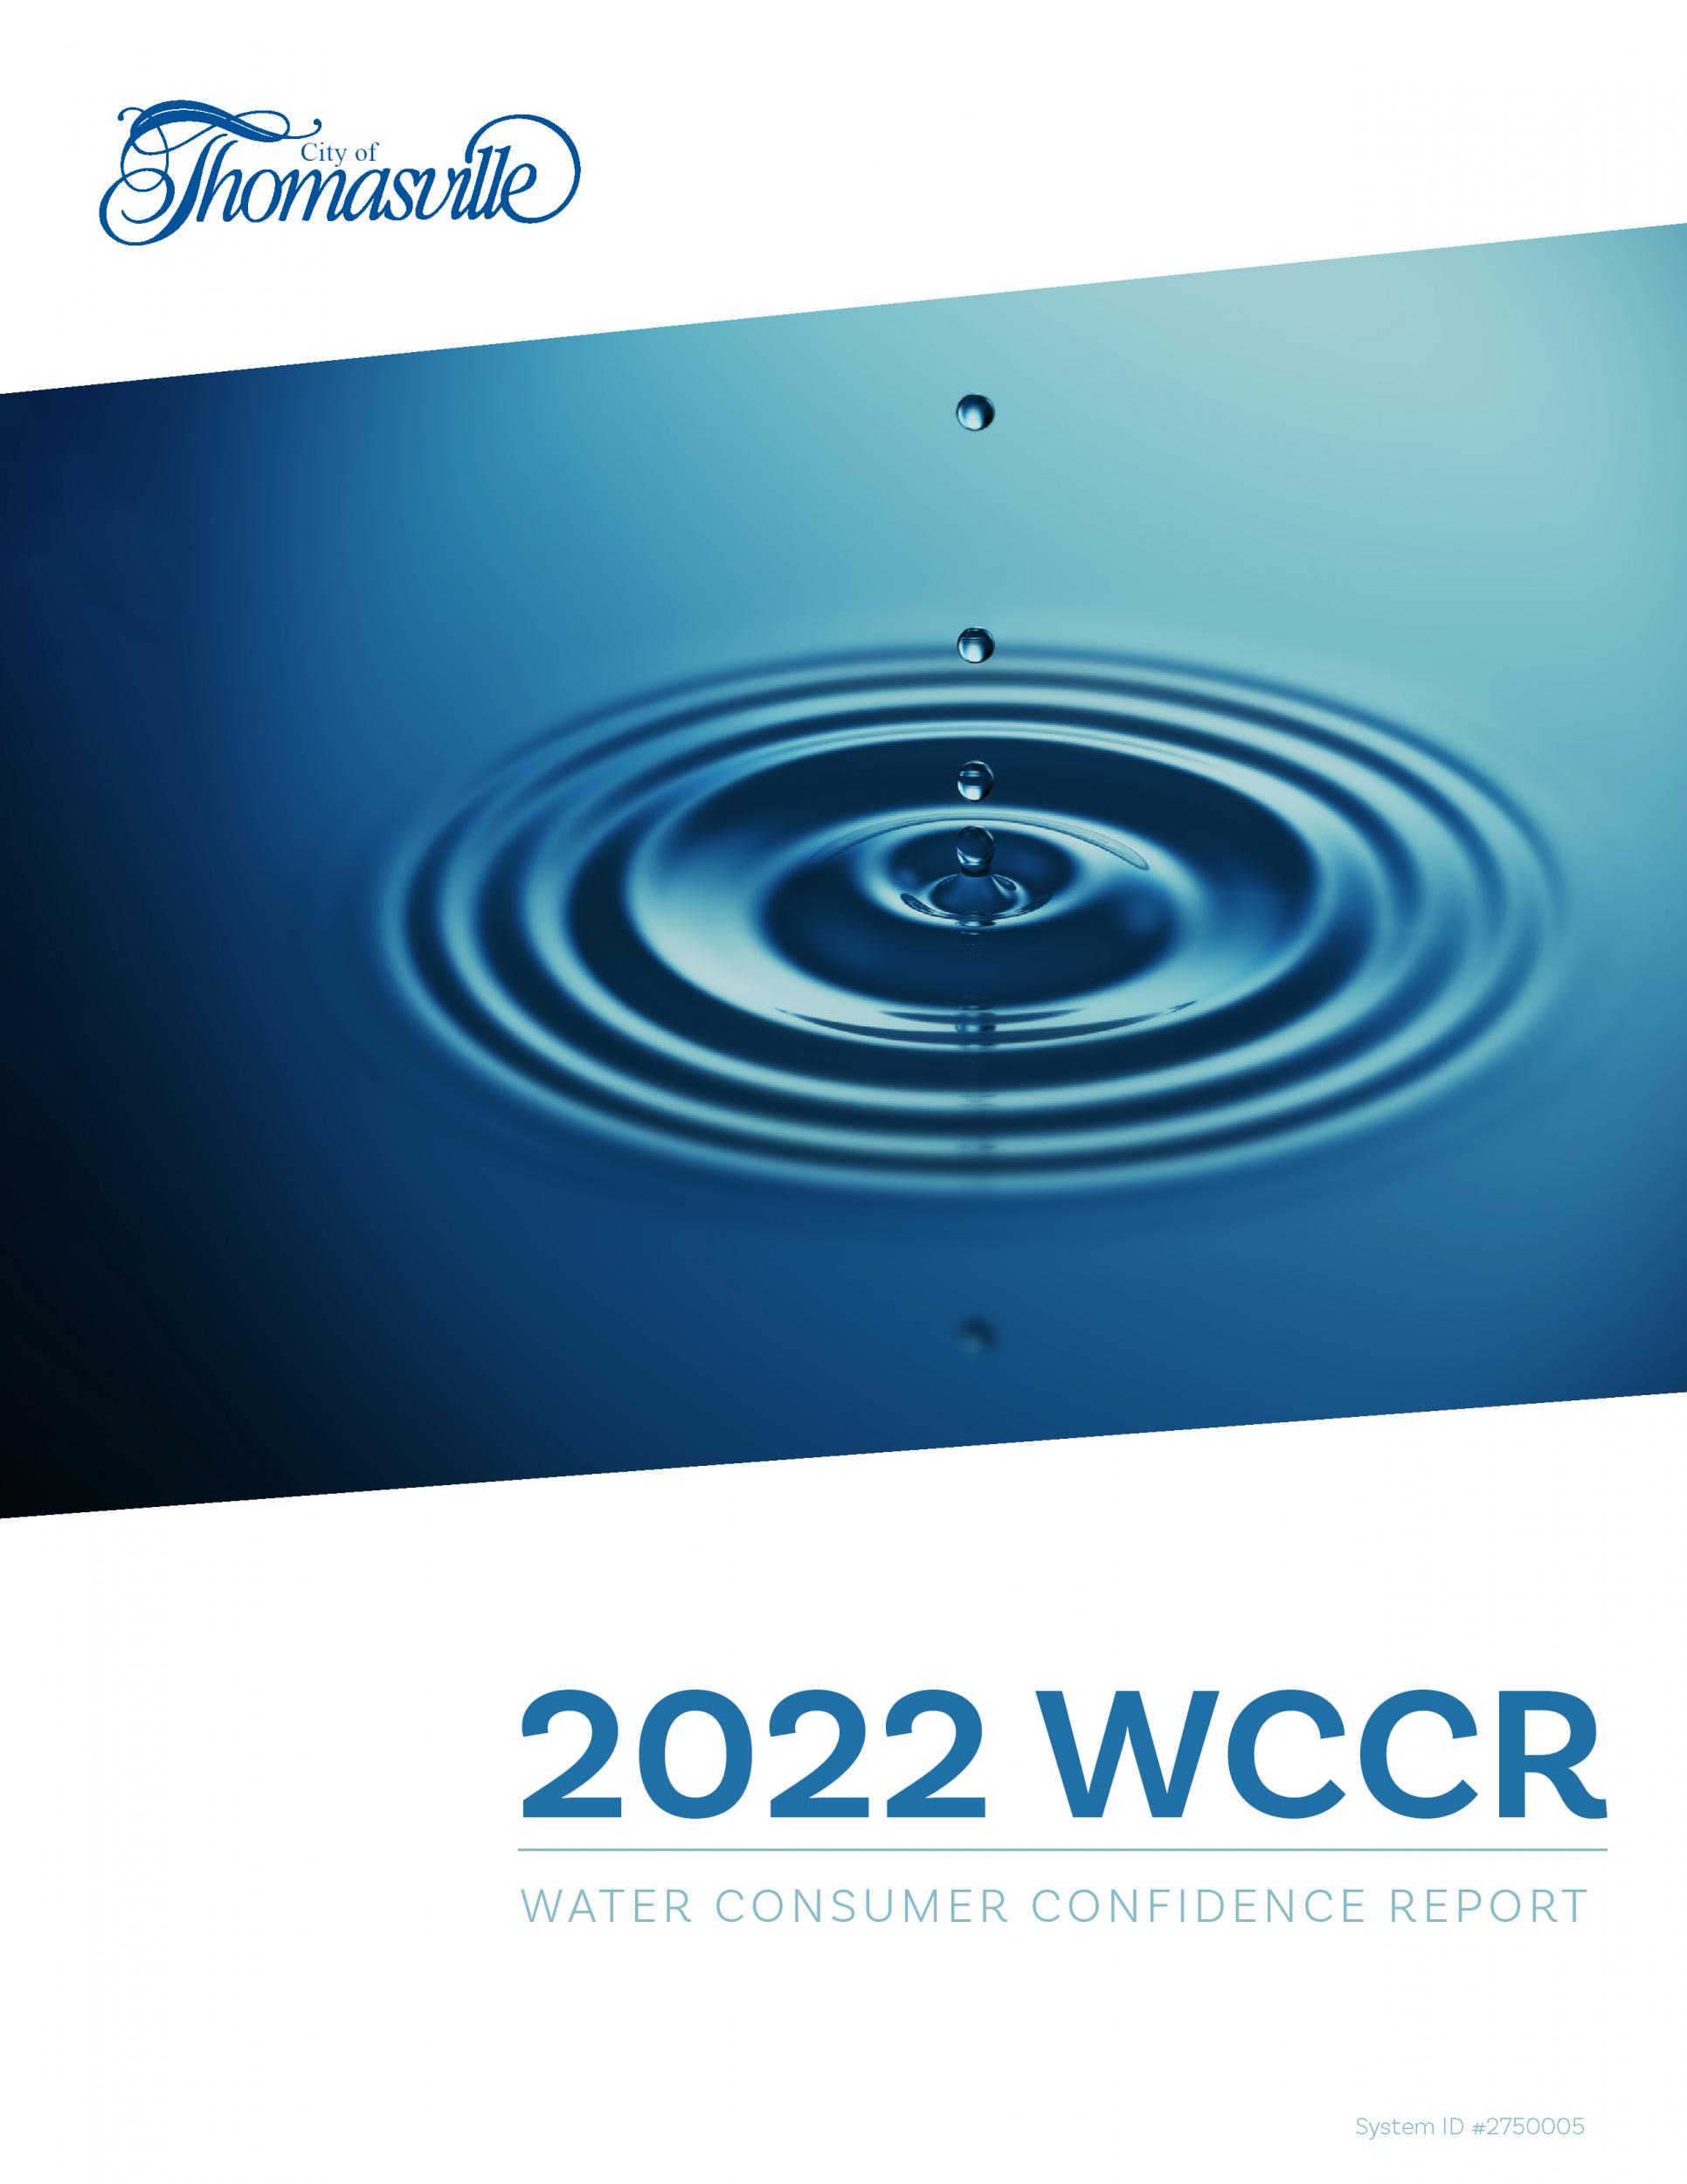 Click here for the 2022 Water Consumer Confidence Report